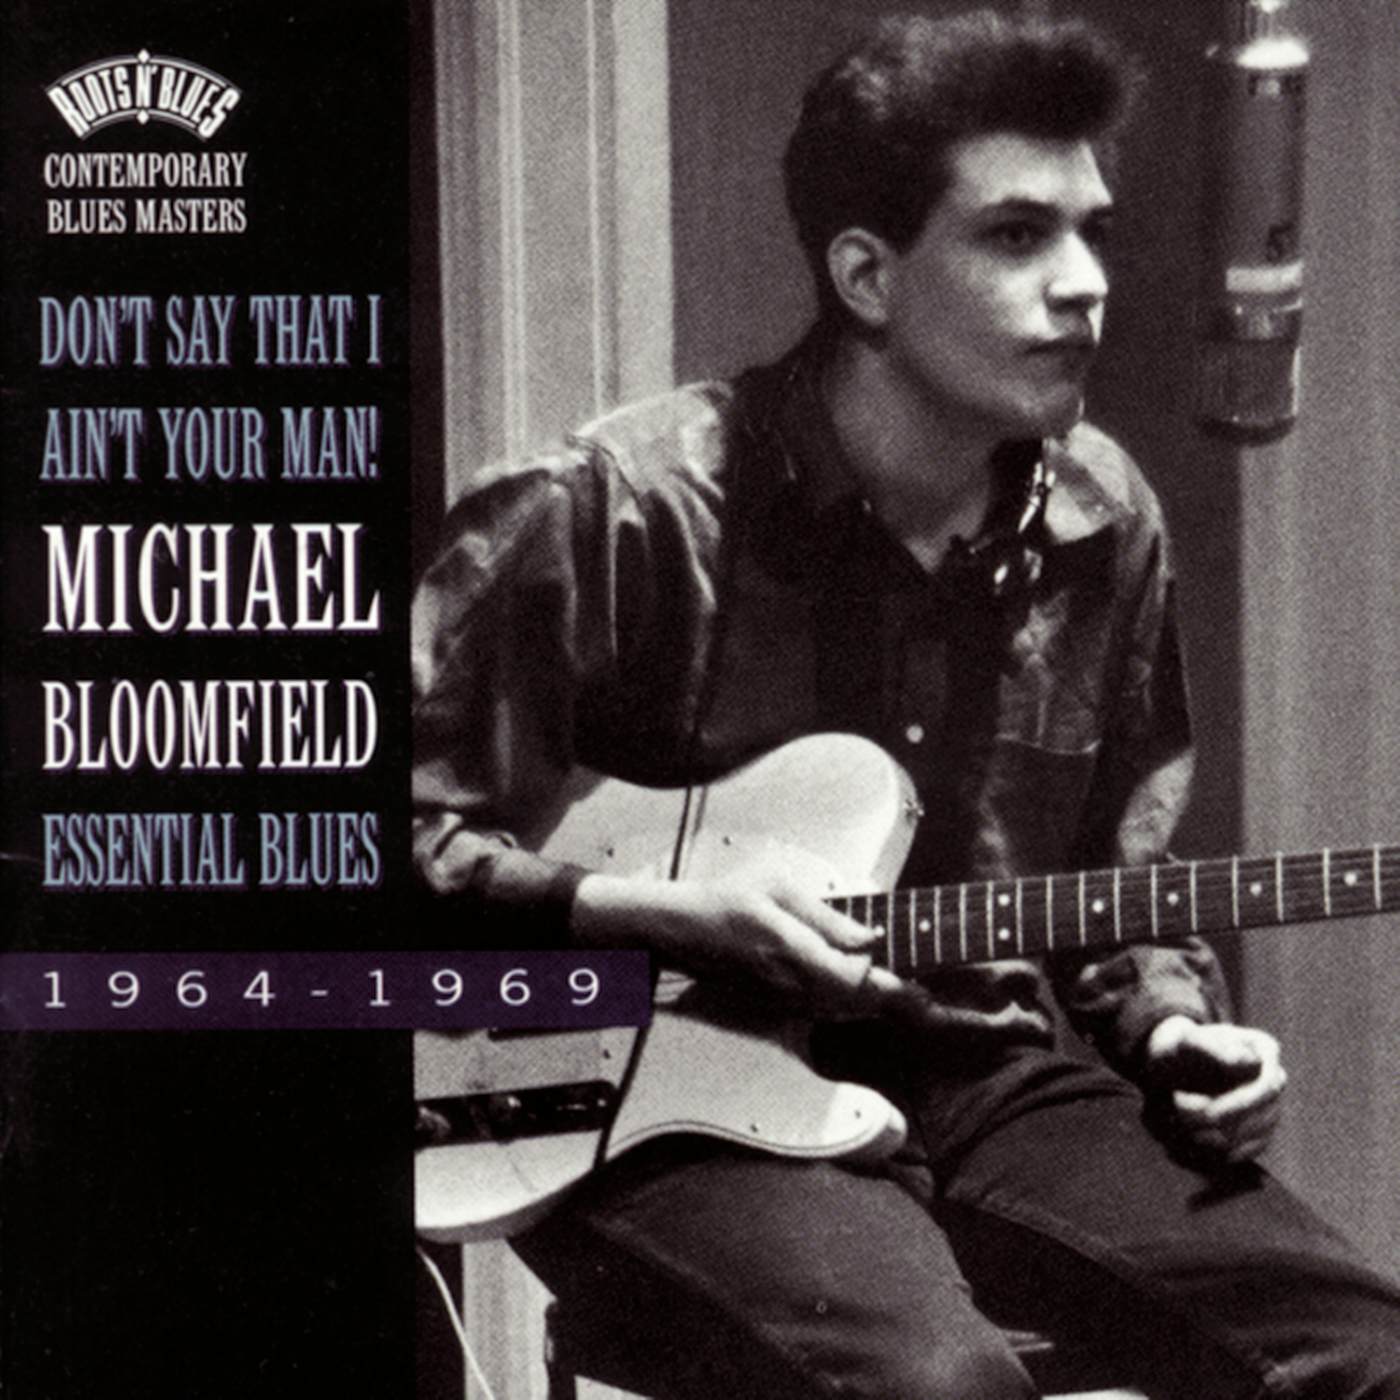 Mike Bloomfield DON'T SAY THAT I AIN'T YOUR MAN: ESSENTIAL BLUES CD